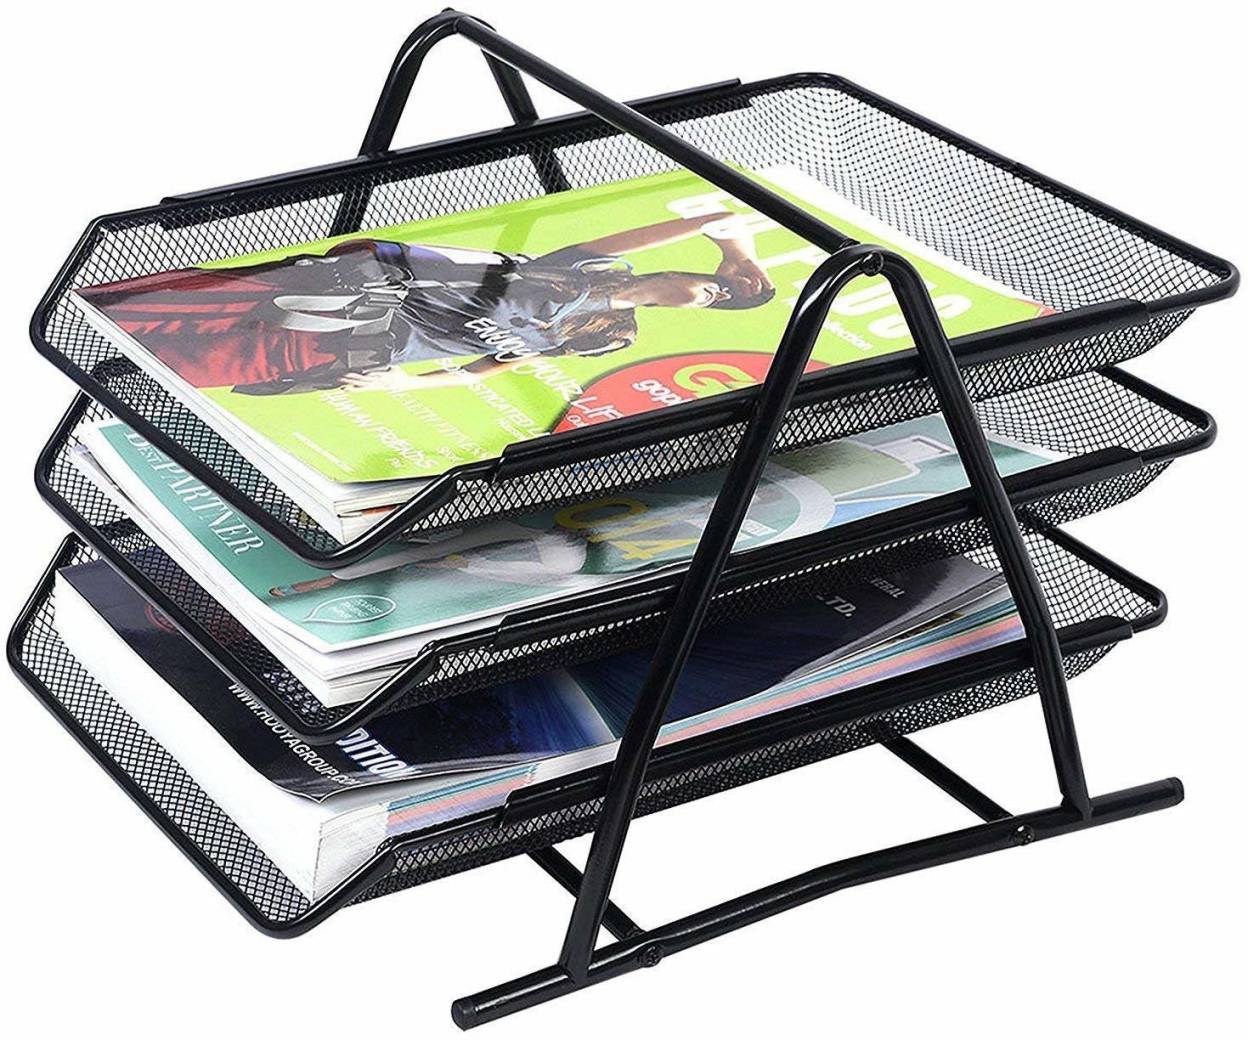 Techsun 3 Compartments Metal Mesh Document Tray For Office File